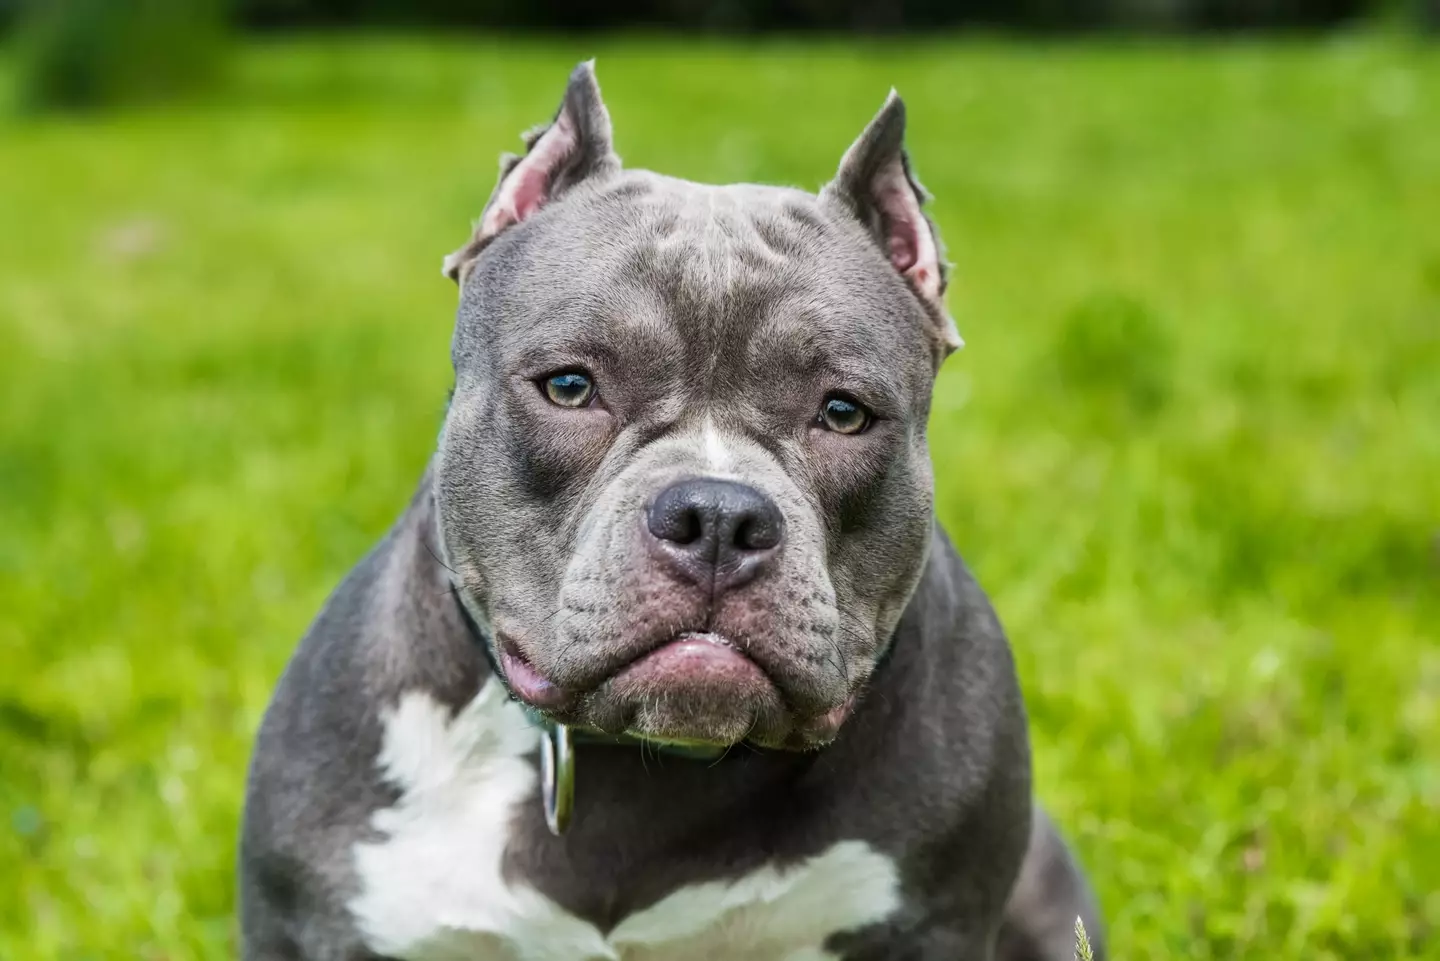 XL American bully dogs could be banned.